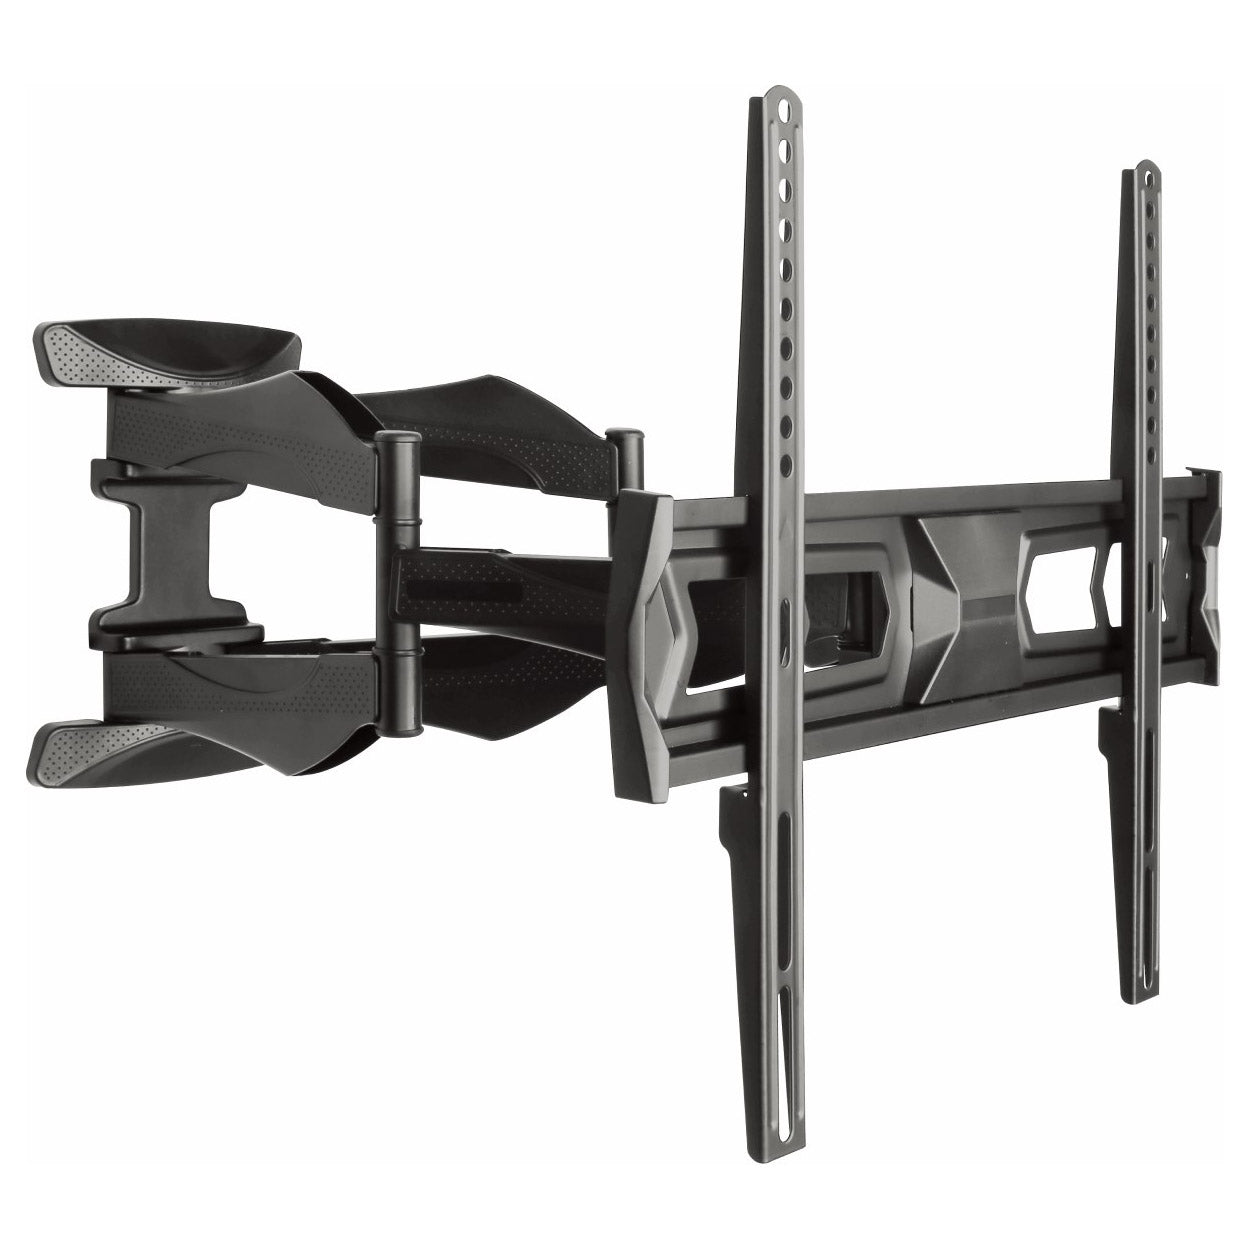 Syncmount SM-3265FM | Articulated wall mount for 32" to 65" TVs - Up to 66 lbs-Audio Video Centrale